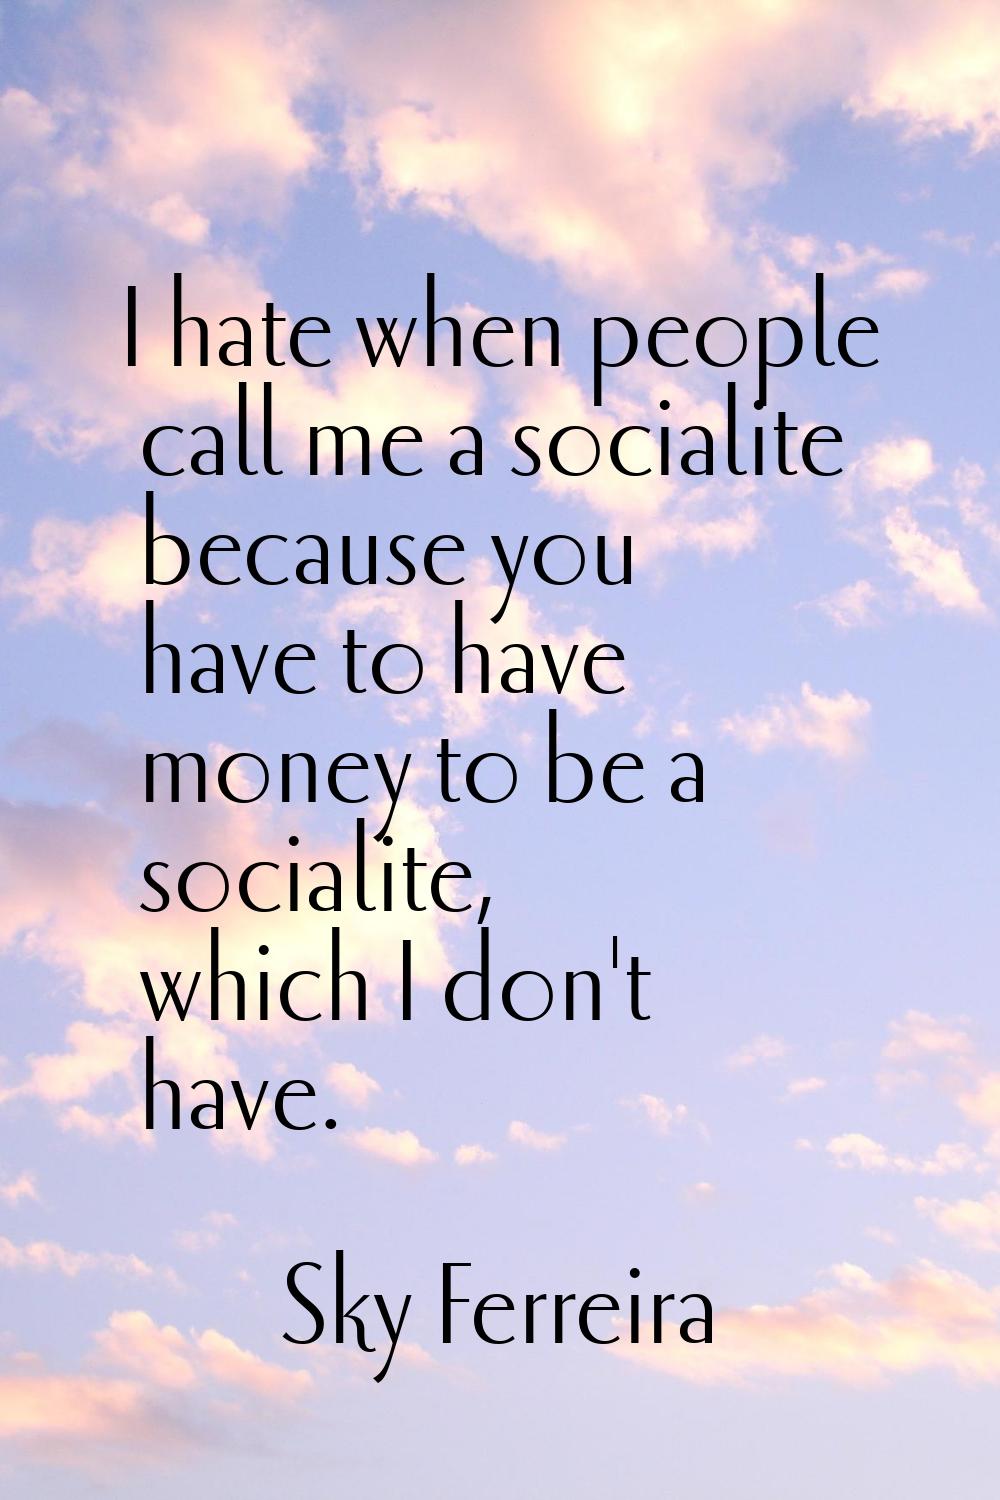 I hate when people call me a socialite because you have to have money to be a socialite, which I do